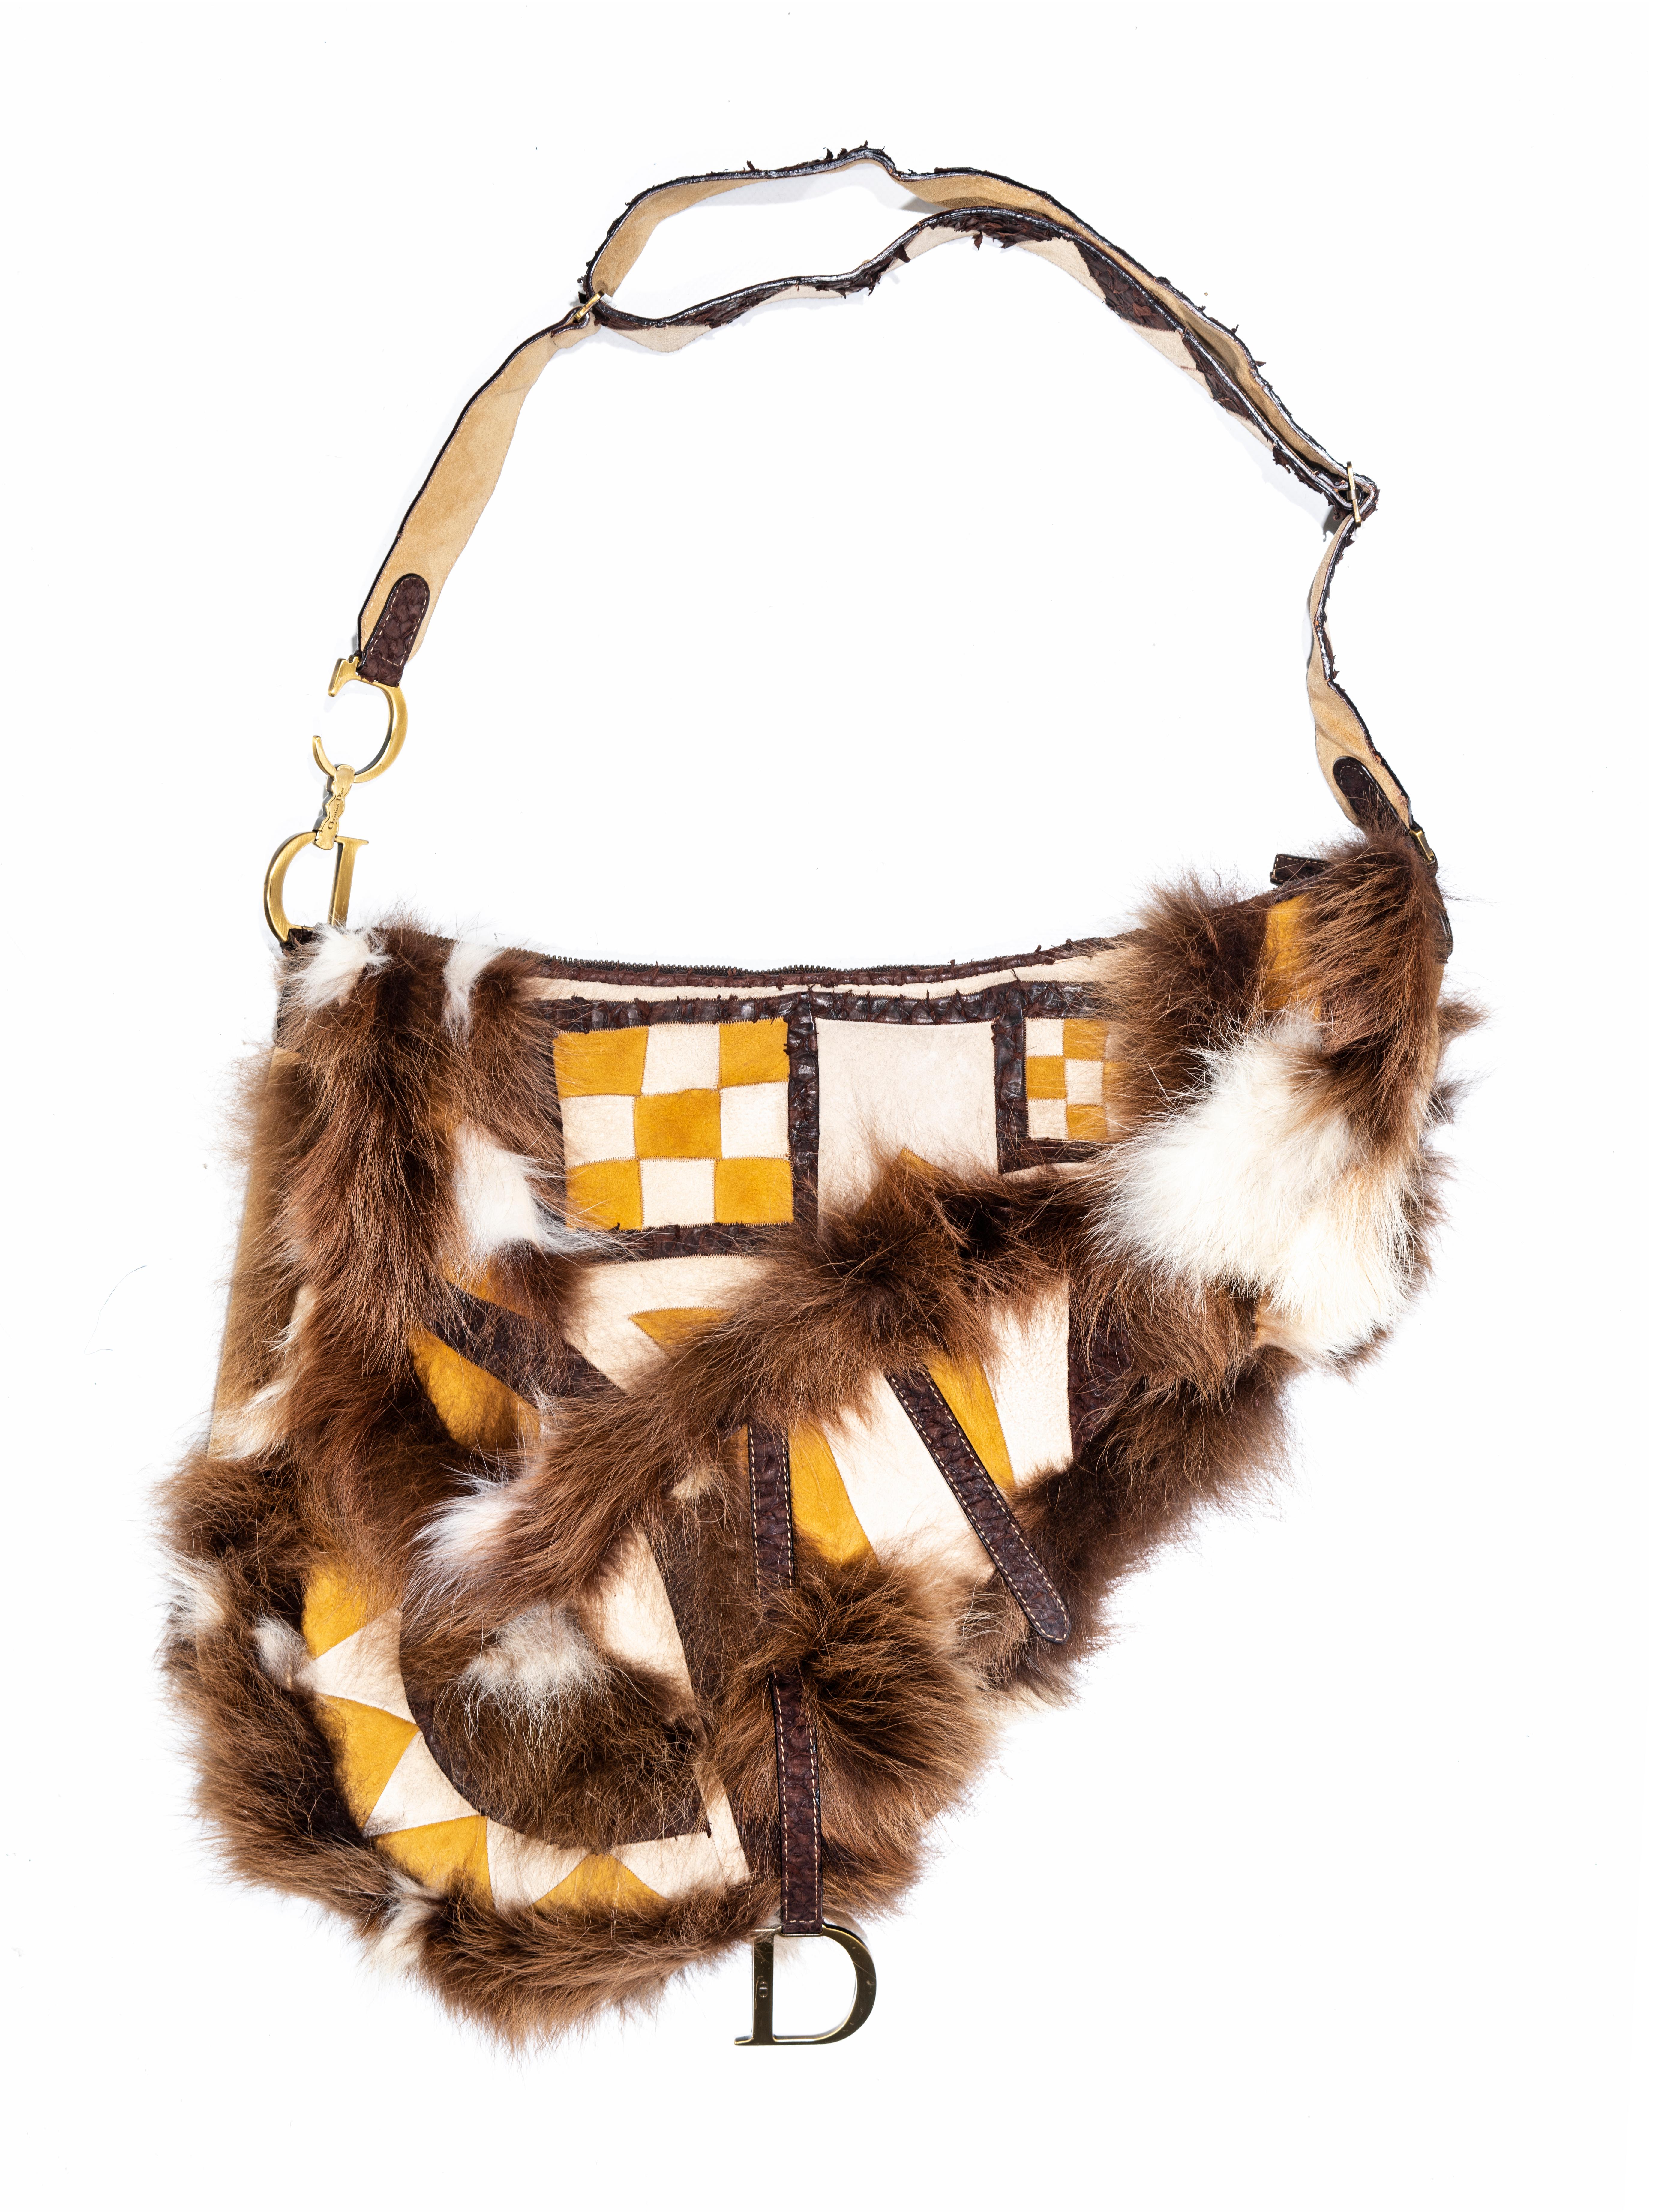 ▪ Christian Dior oversized saddle bag 
▪ Designed by John Galliano 
▪ Cream and yellow patchwork suede 
▪ Brown fur trim 
▪ Brown fish skin trim 
▪ Adjustable shoulder strap 
▪ Gold-finish metal hardware
▪ Saddle flap with a magnetic 'D' stirrup